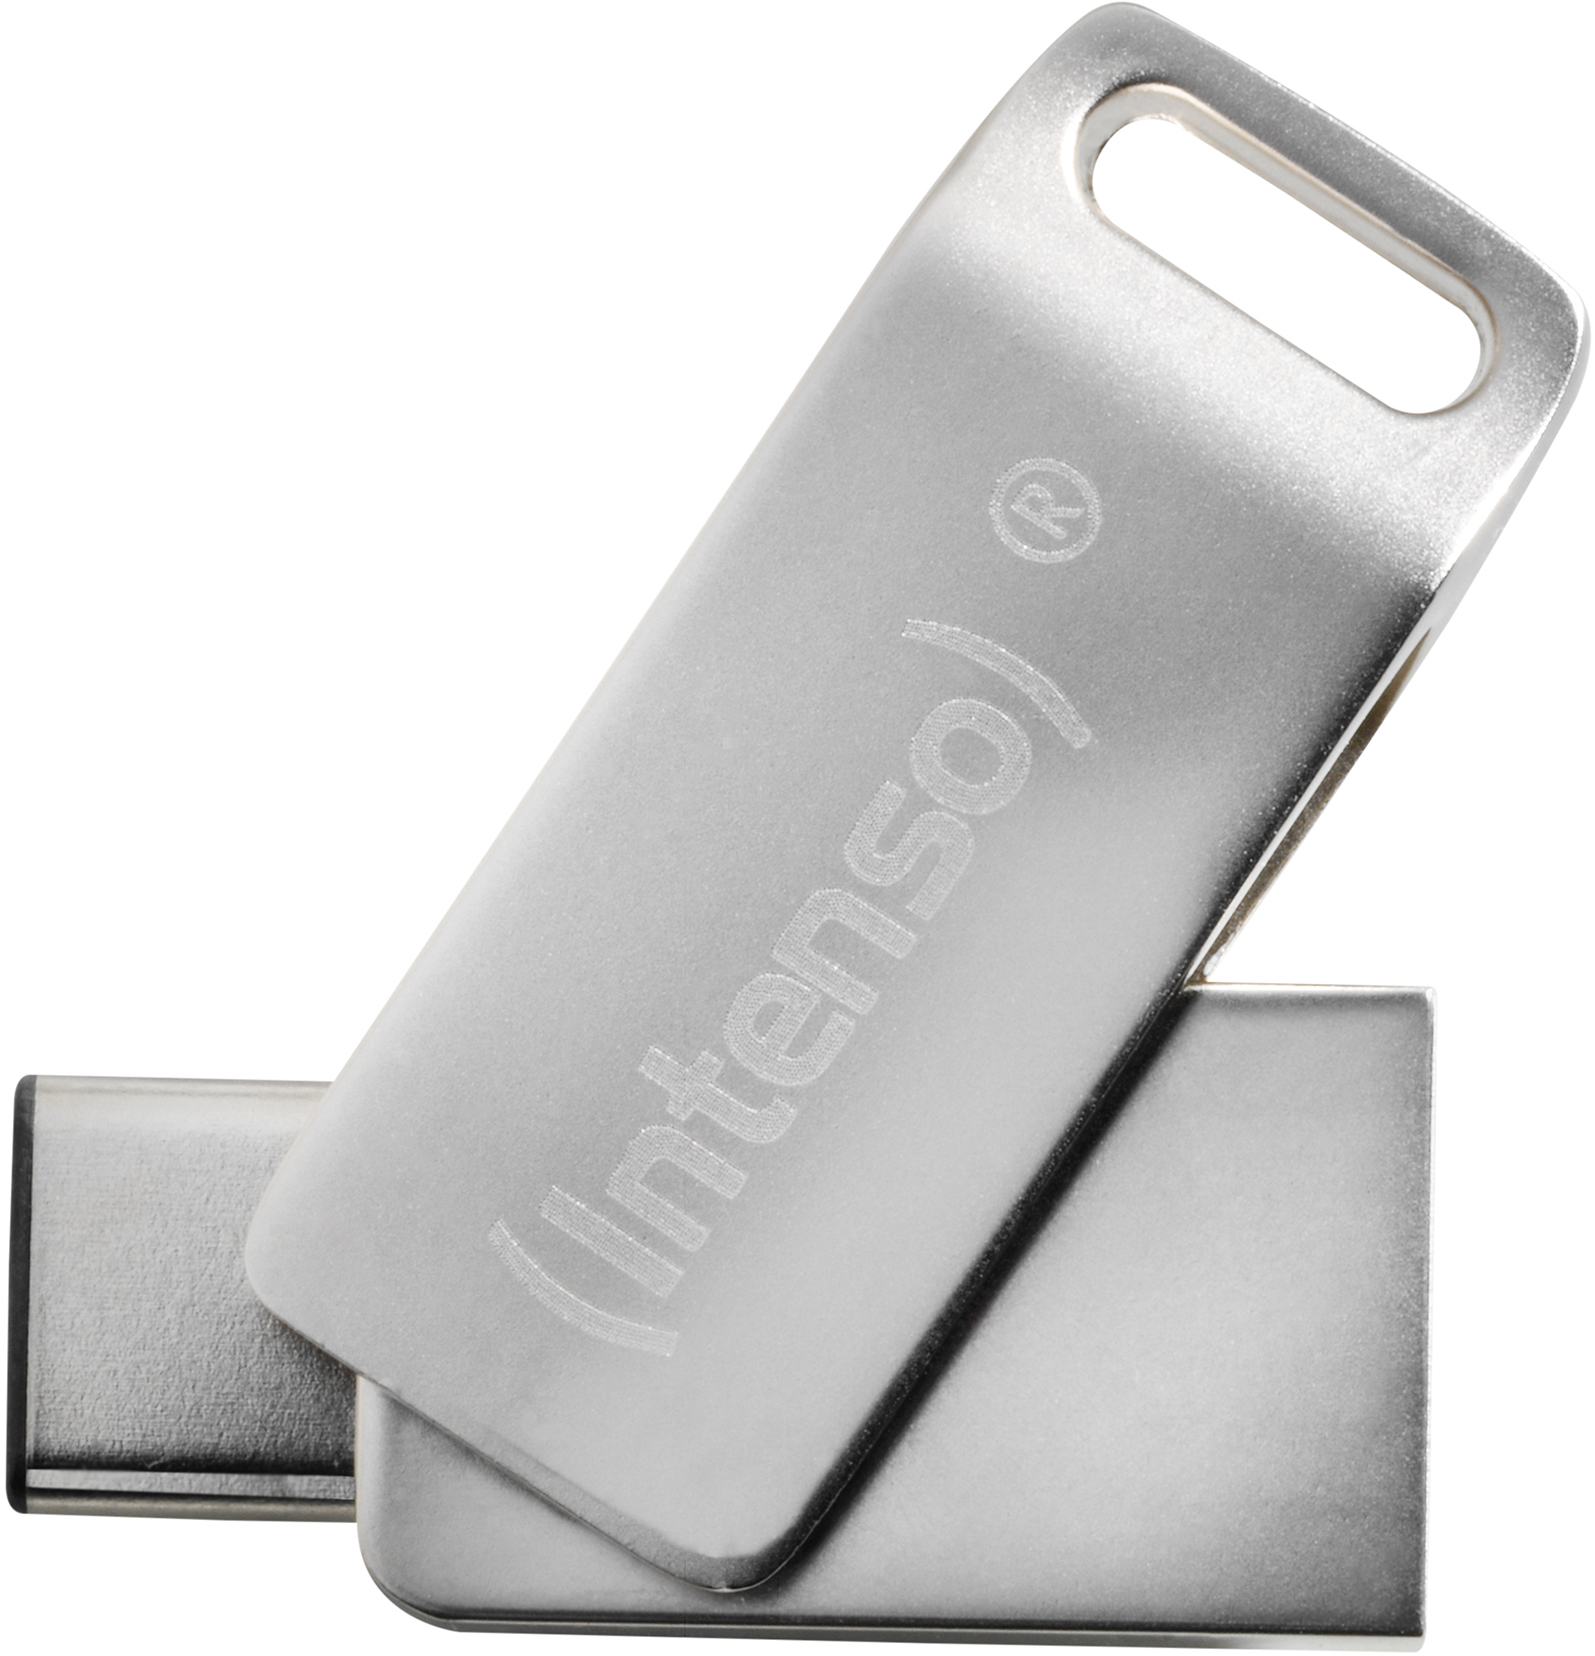 INTENSO CMOBILE LINE USB-Stick, MB/s, 70 Silber 64 GB